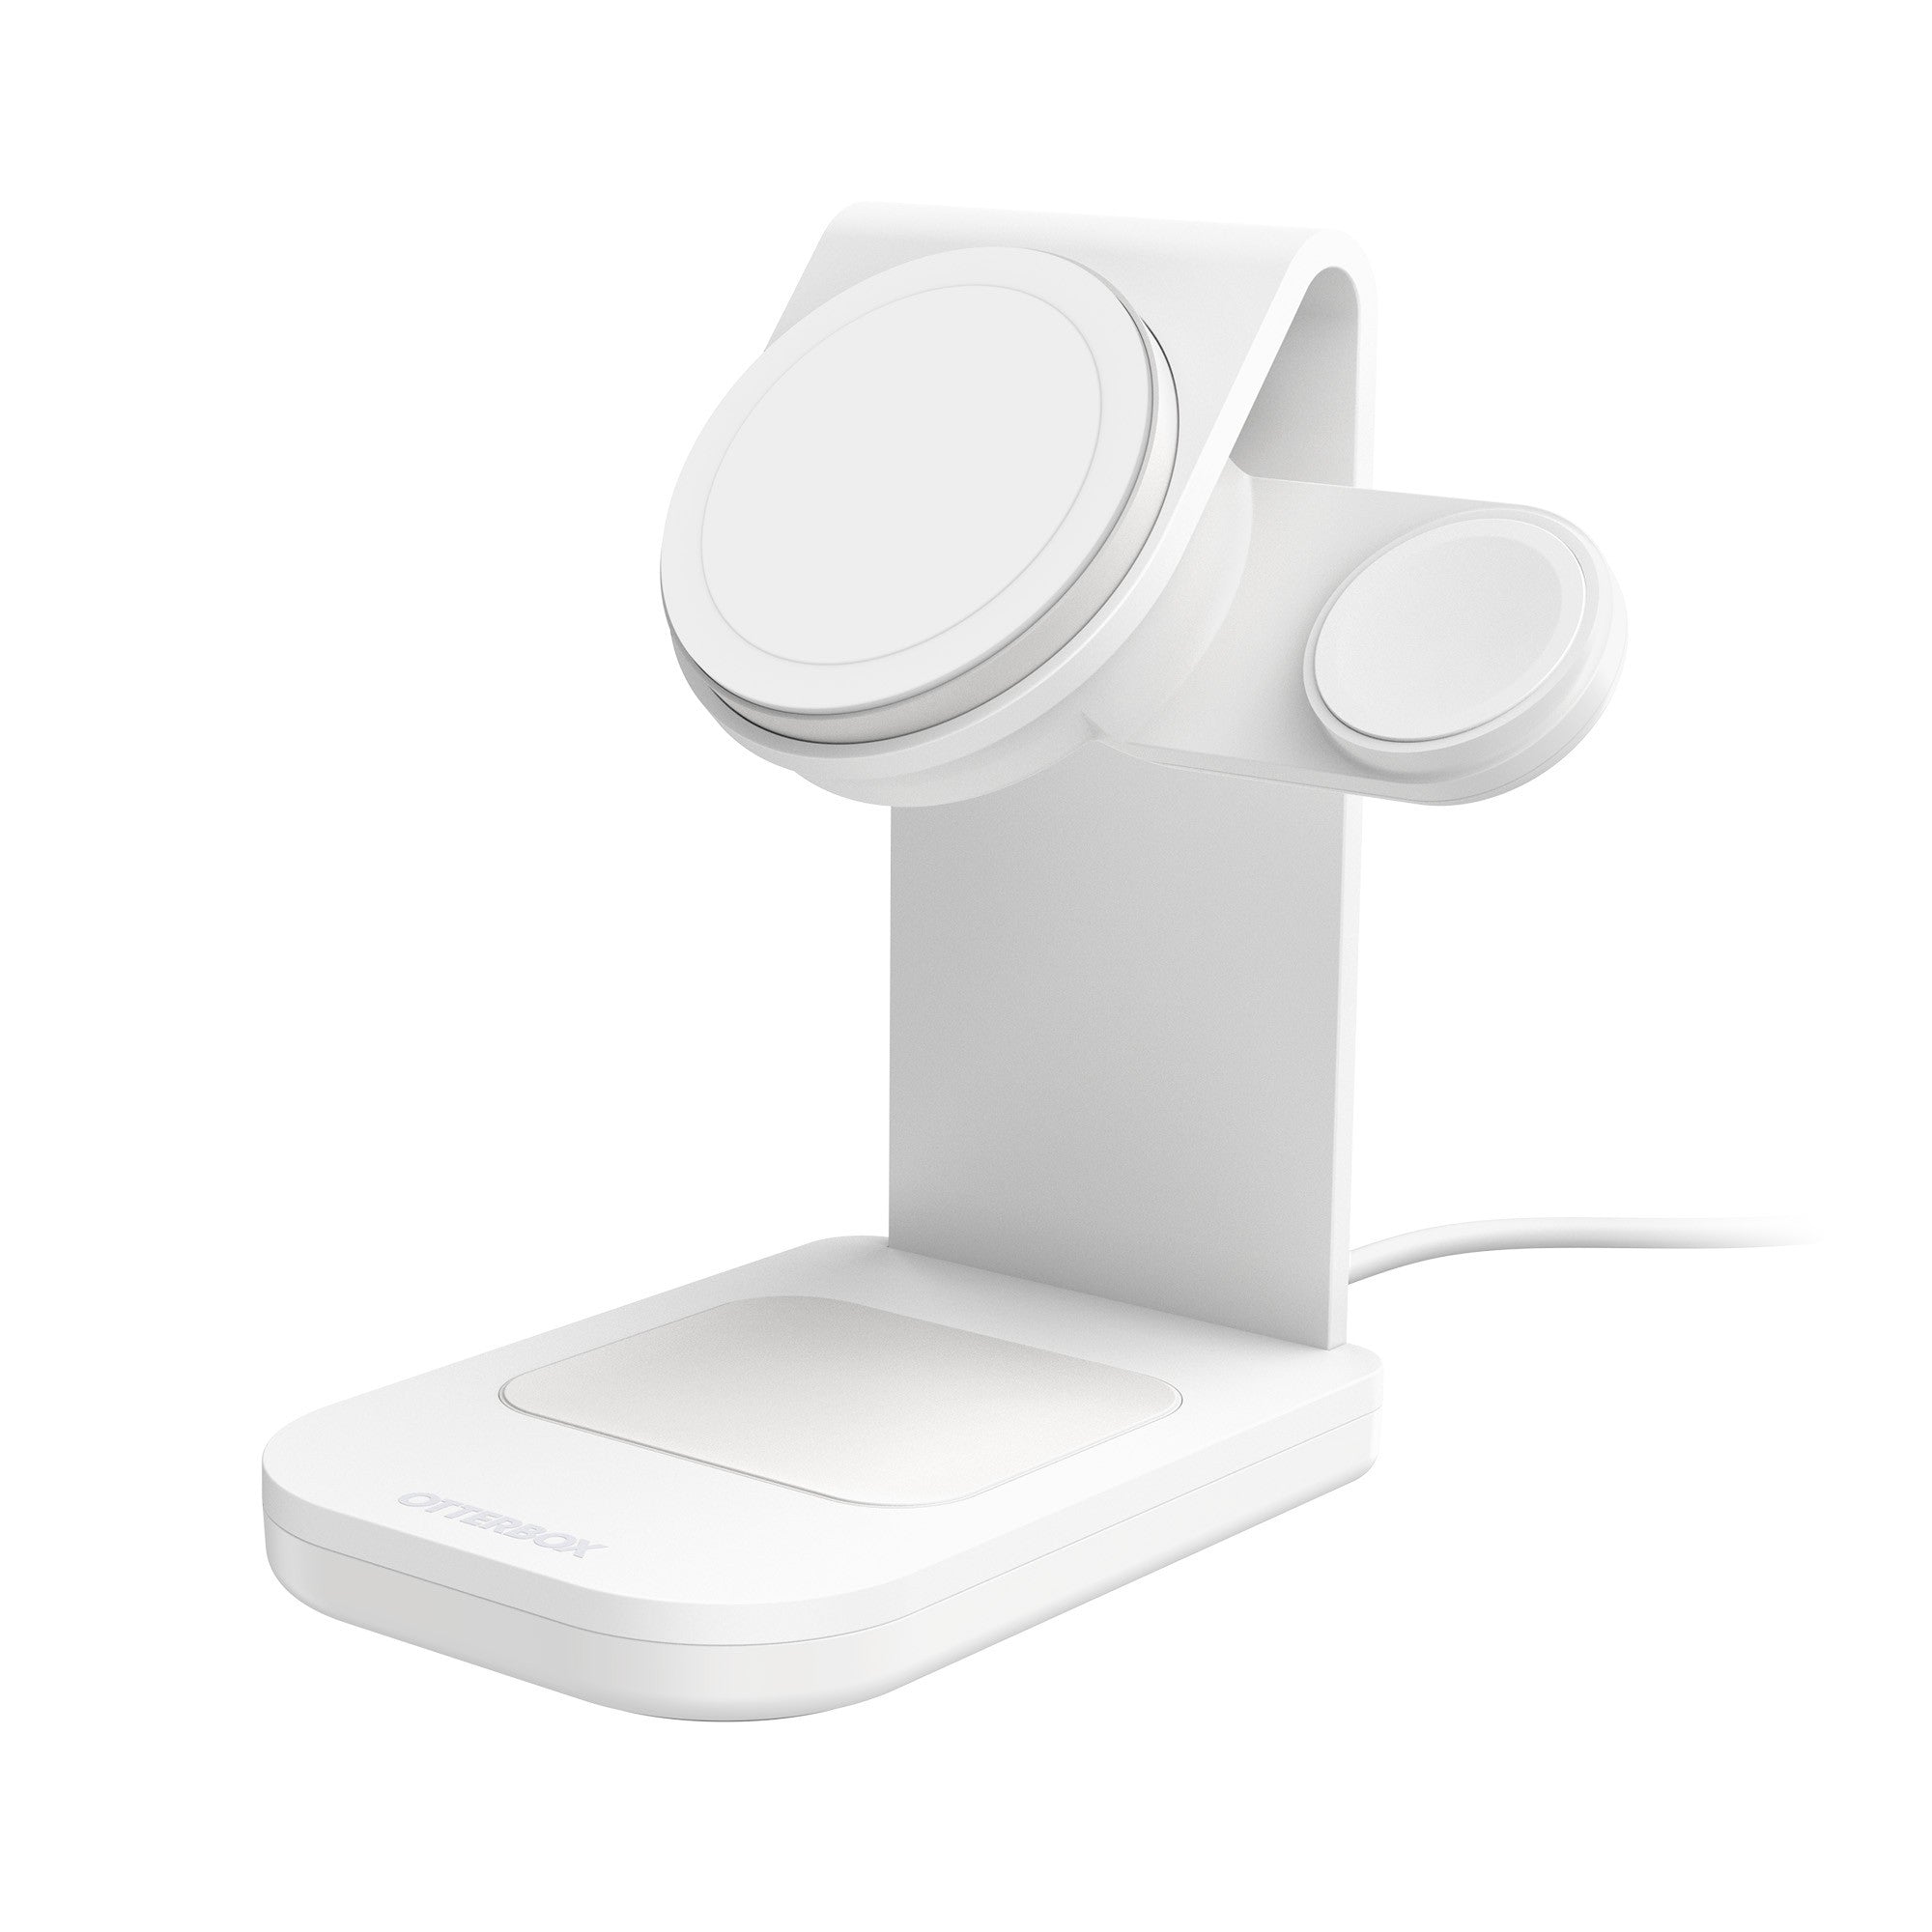 Otterbox 3-in-1 Charging Station Made for MagSafe w/ Apple Watch Charger + Airpods - White - 15-10678